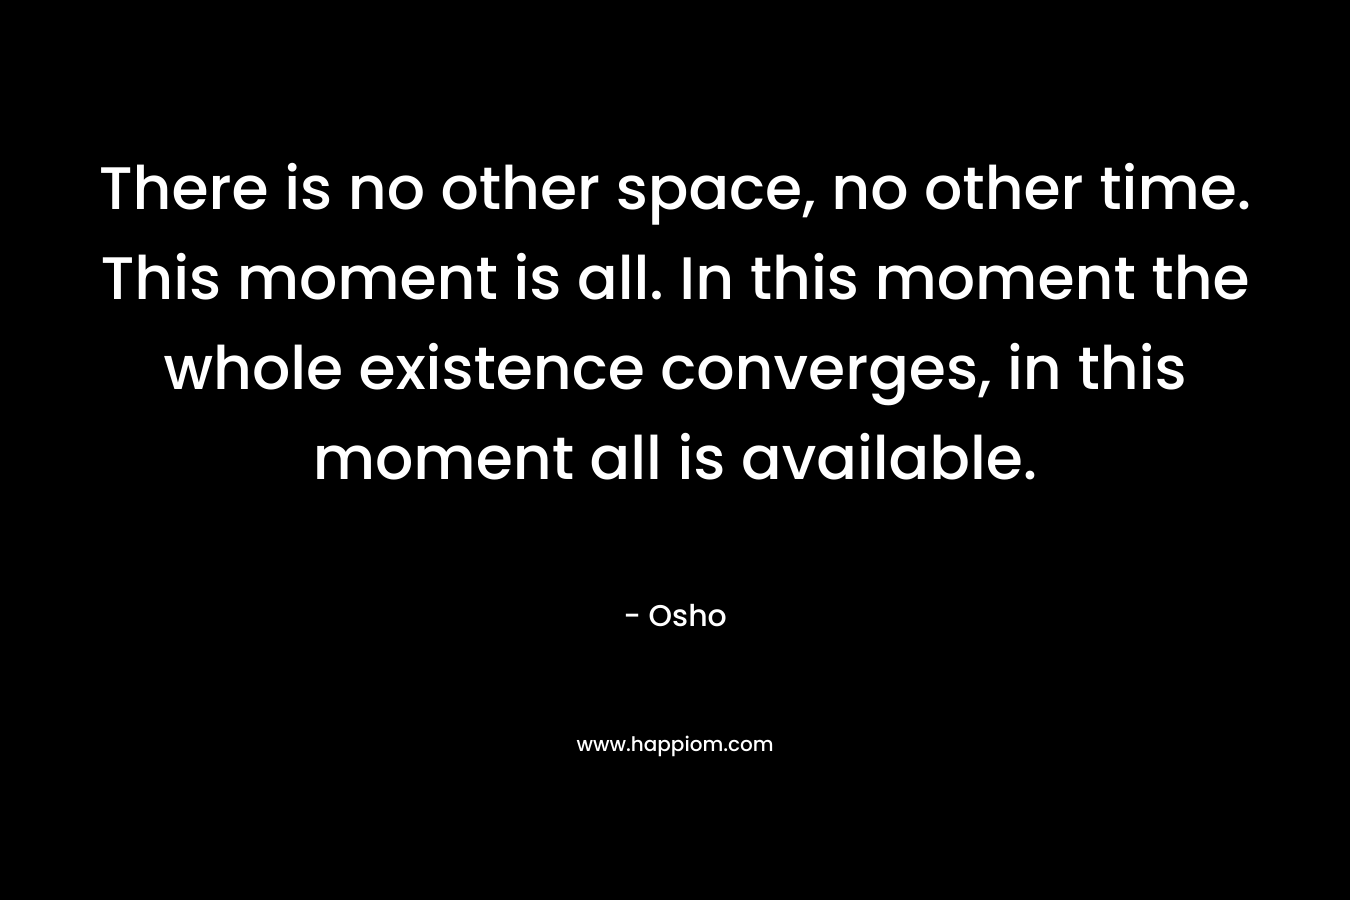 There is no other space, no other time. This moment is all. In this moment the whole existence converges, in this moment all is available. – Osho